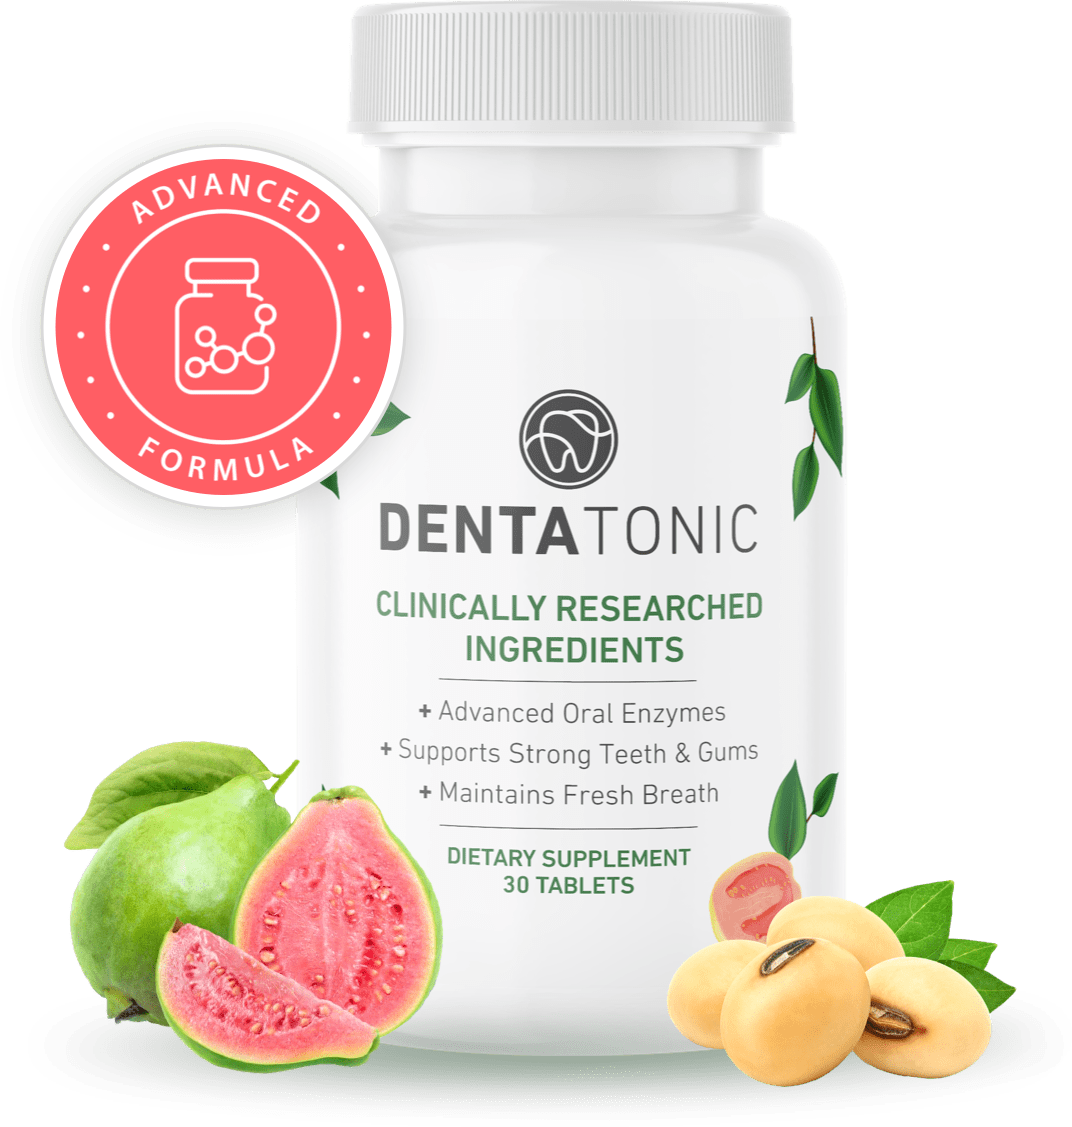 DentaTonic Reviews: Is It Worth? Read Customer Report Before Buy! - IPS Inter Press Service Business